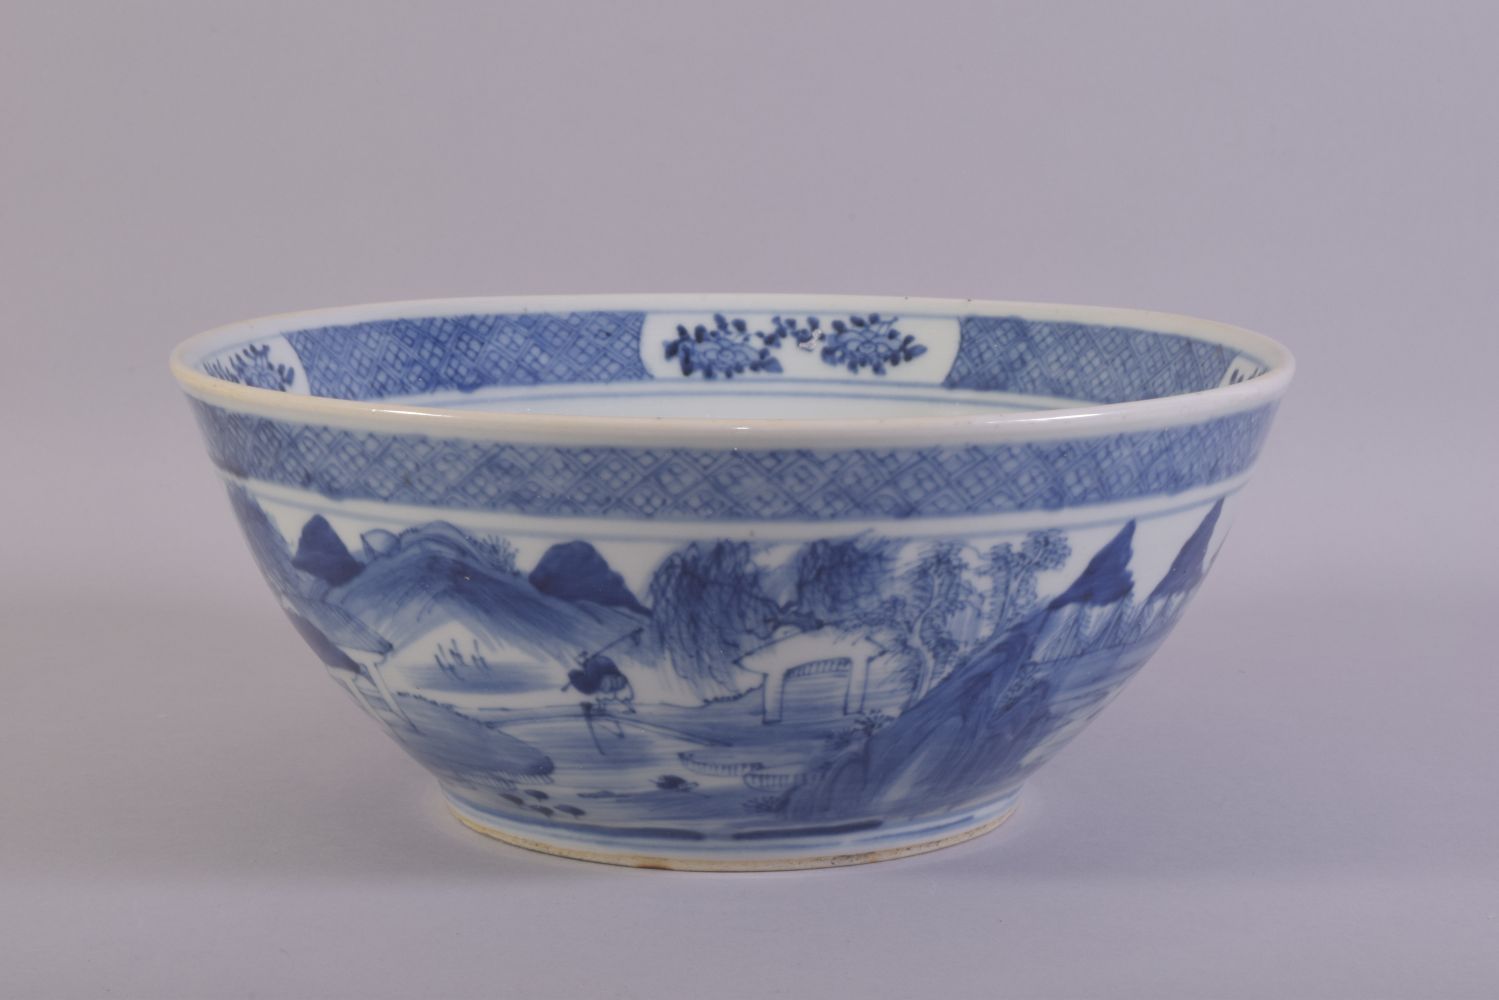 A LARGE CHINESE BLUE AND WHITE PORCELAIN BOWL, decorated with a landscape including figures, - Image 2 of 6